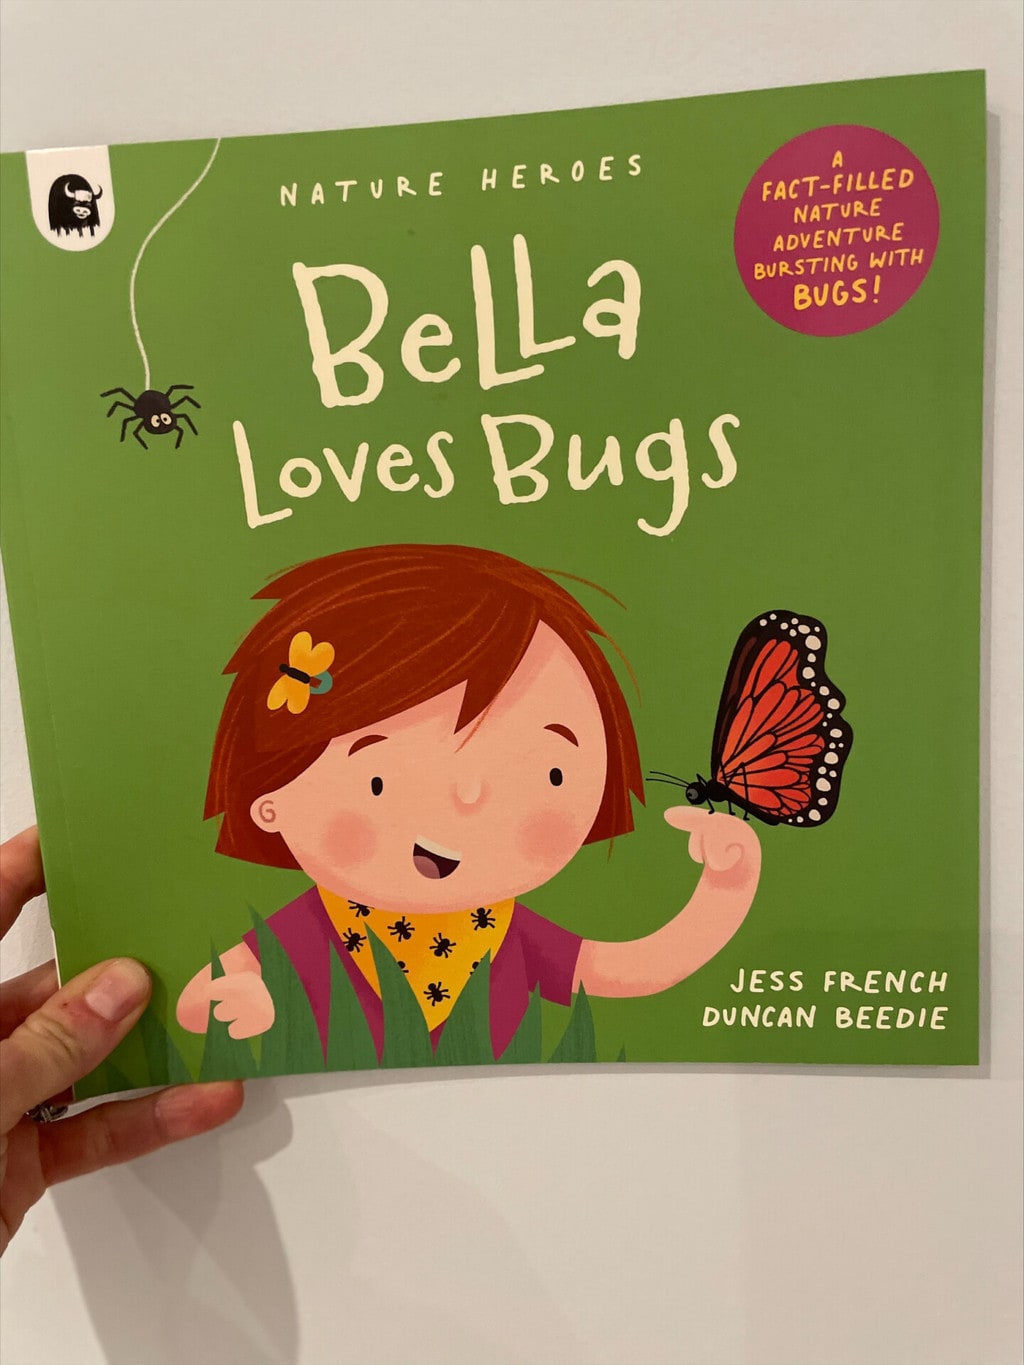 Nature Heroes: Bella Loves Bugs (Jess French) (author), Duncan Beedie (illustrator), Happy Yak (imprint of Quarto) (publisher)